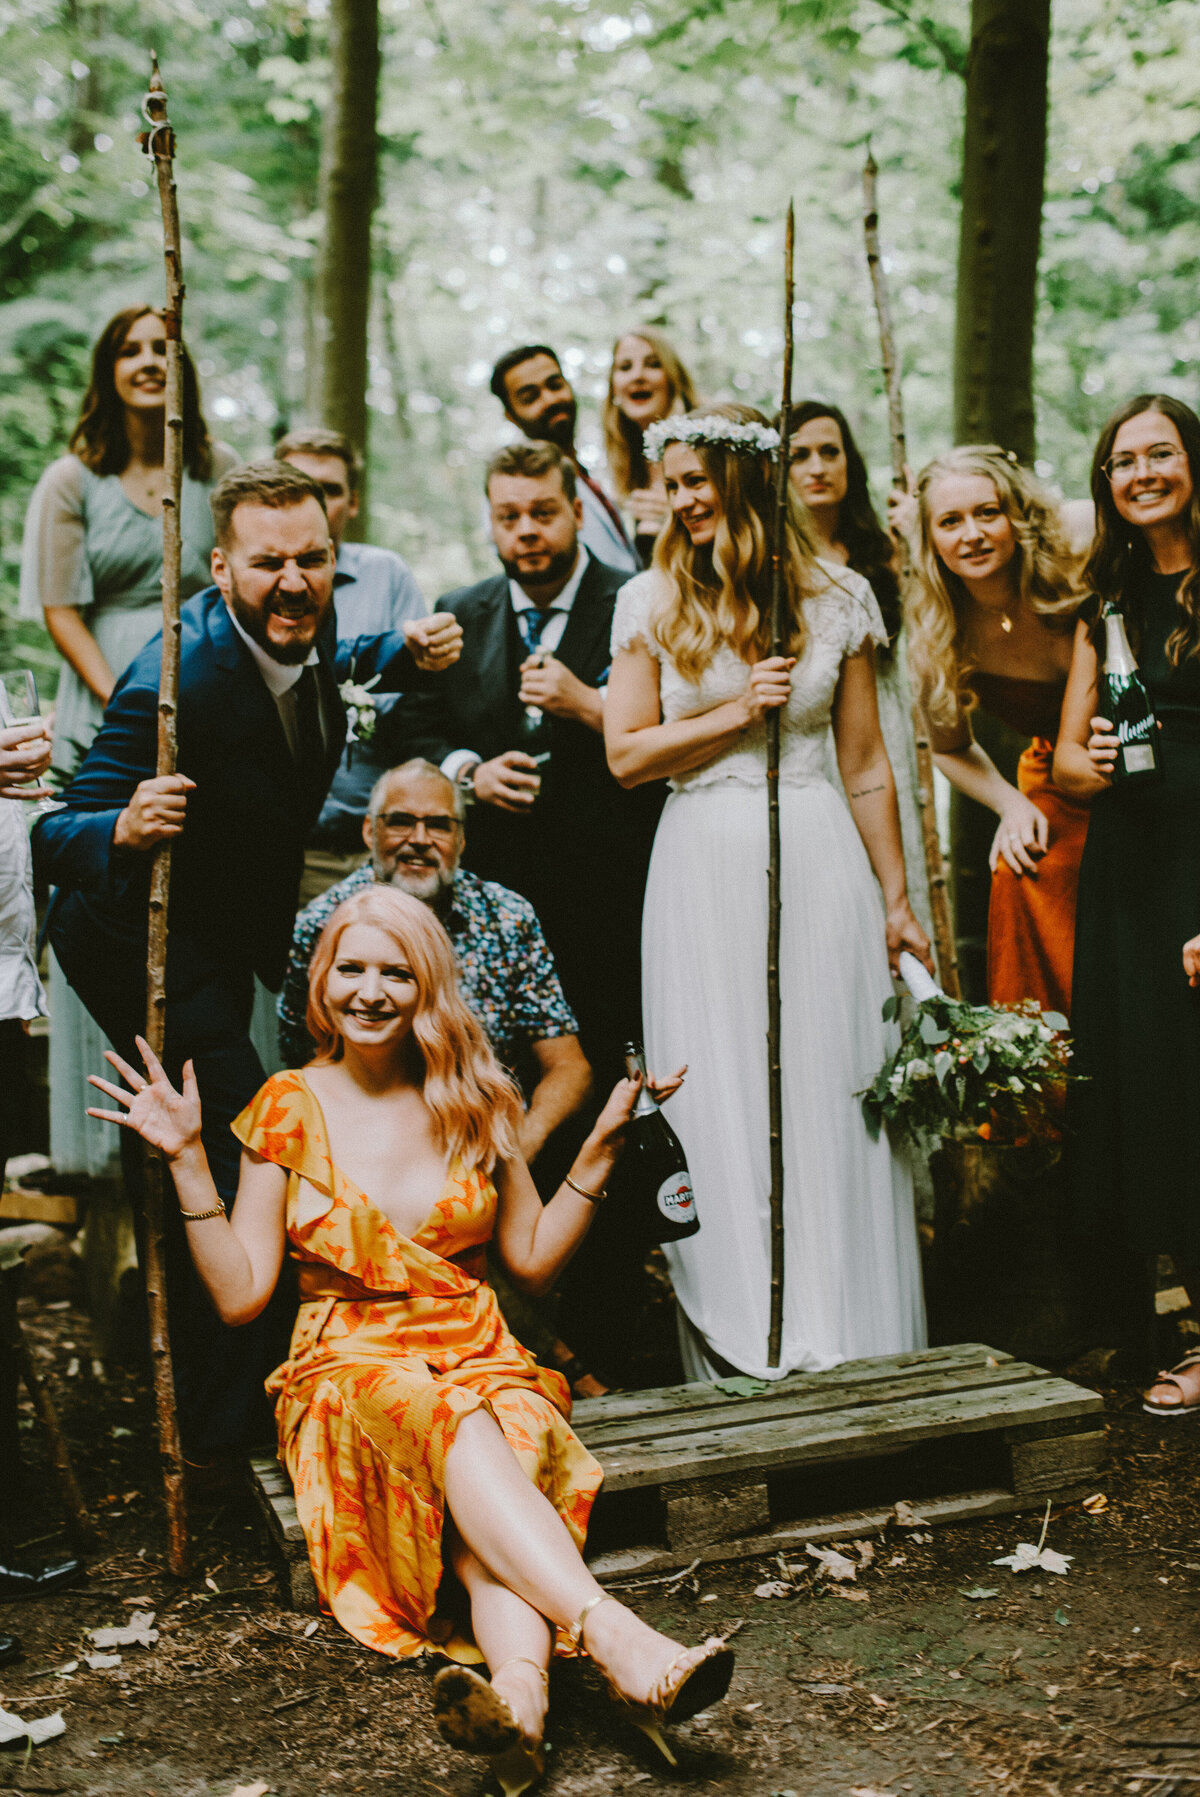 Wedding guests posing in the forest as they have destination wedding abroad in Denmark